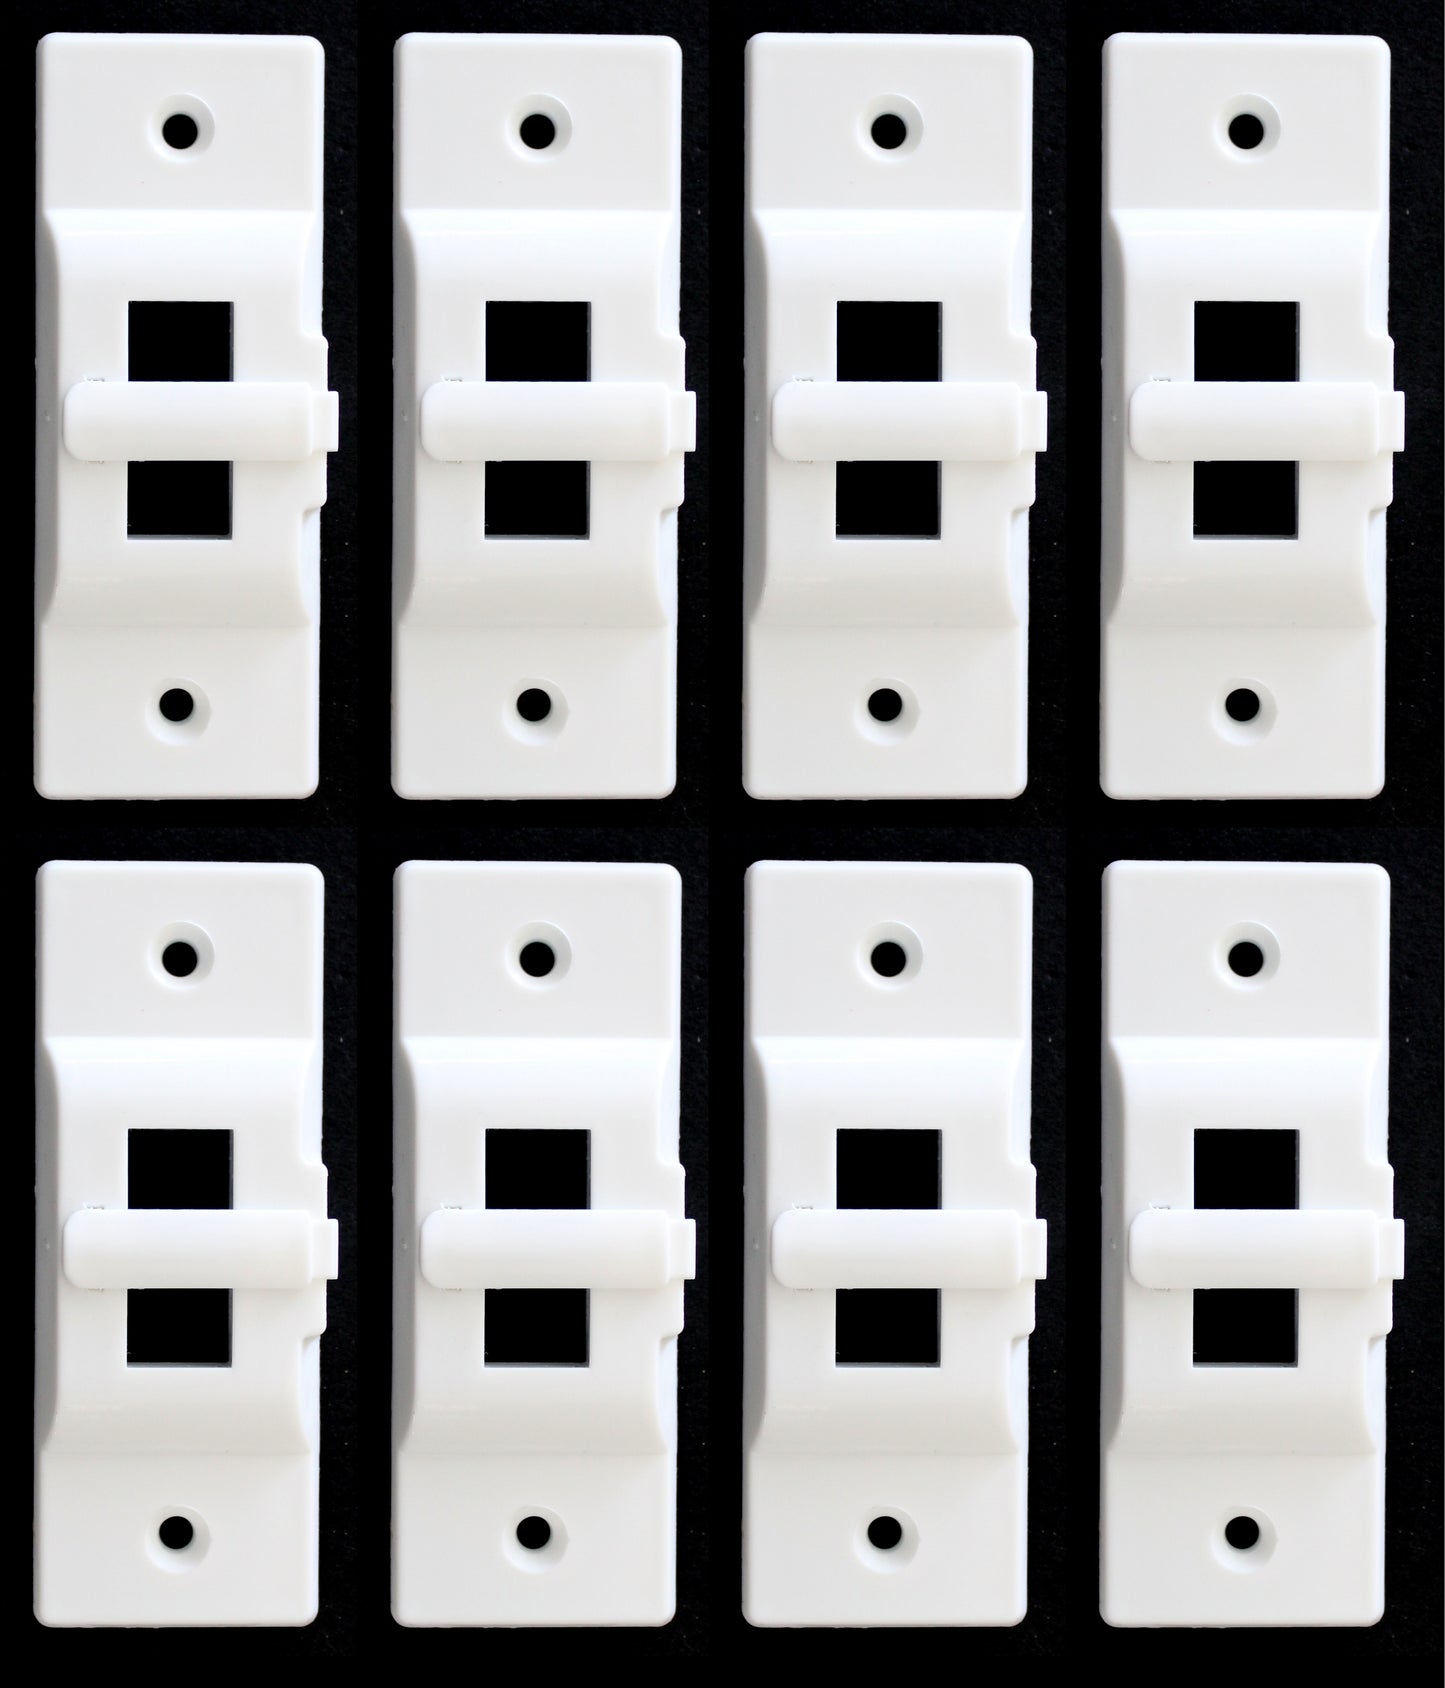 White Hinge Lock Light Switch Guard Cover - Prevent accidental turning on & off